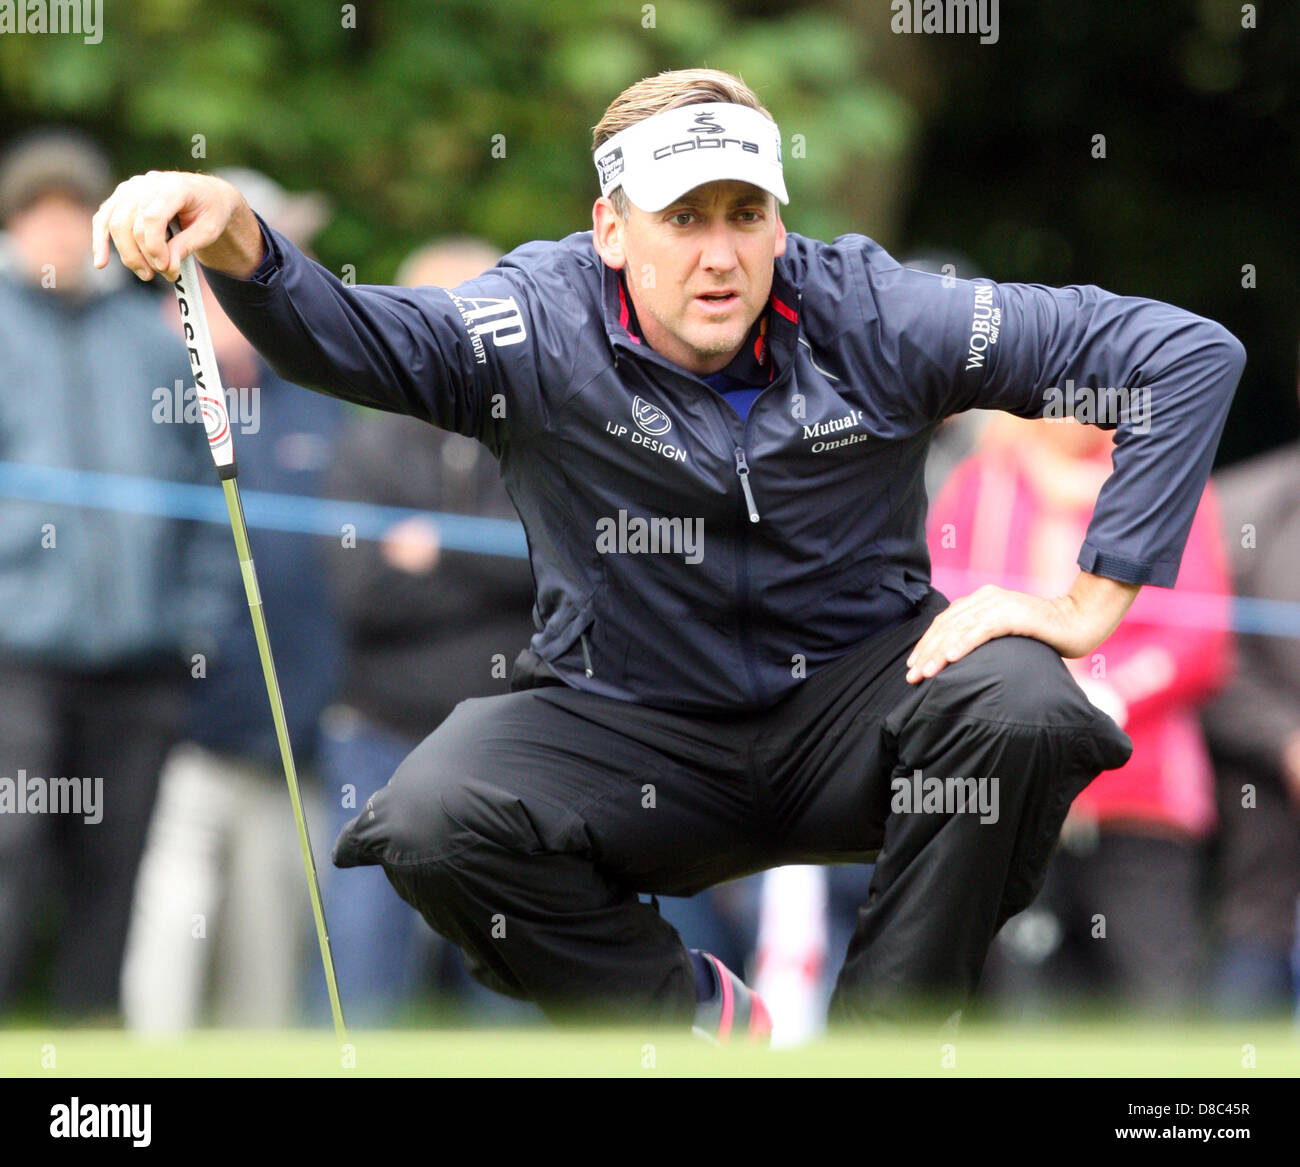 24.05.2013 Wentworth, England.  Ian Poulter  during the BMW PGA Championship Round 2 from Wentworth Golf Club Stock Photo